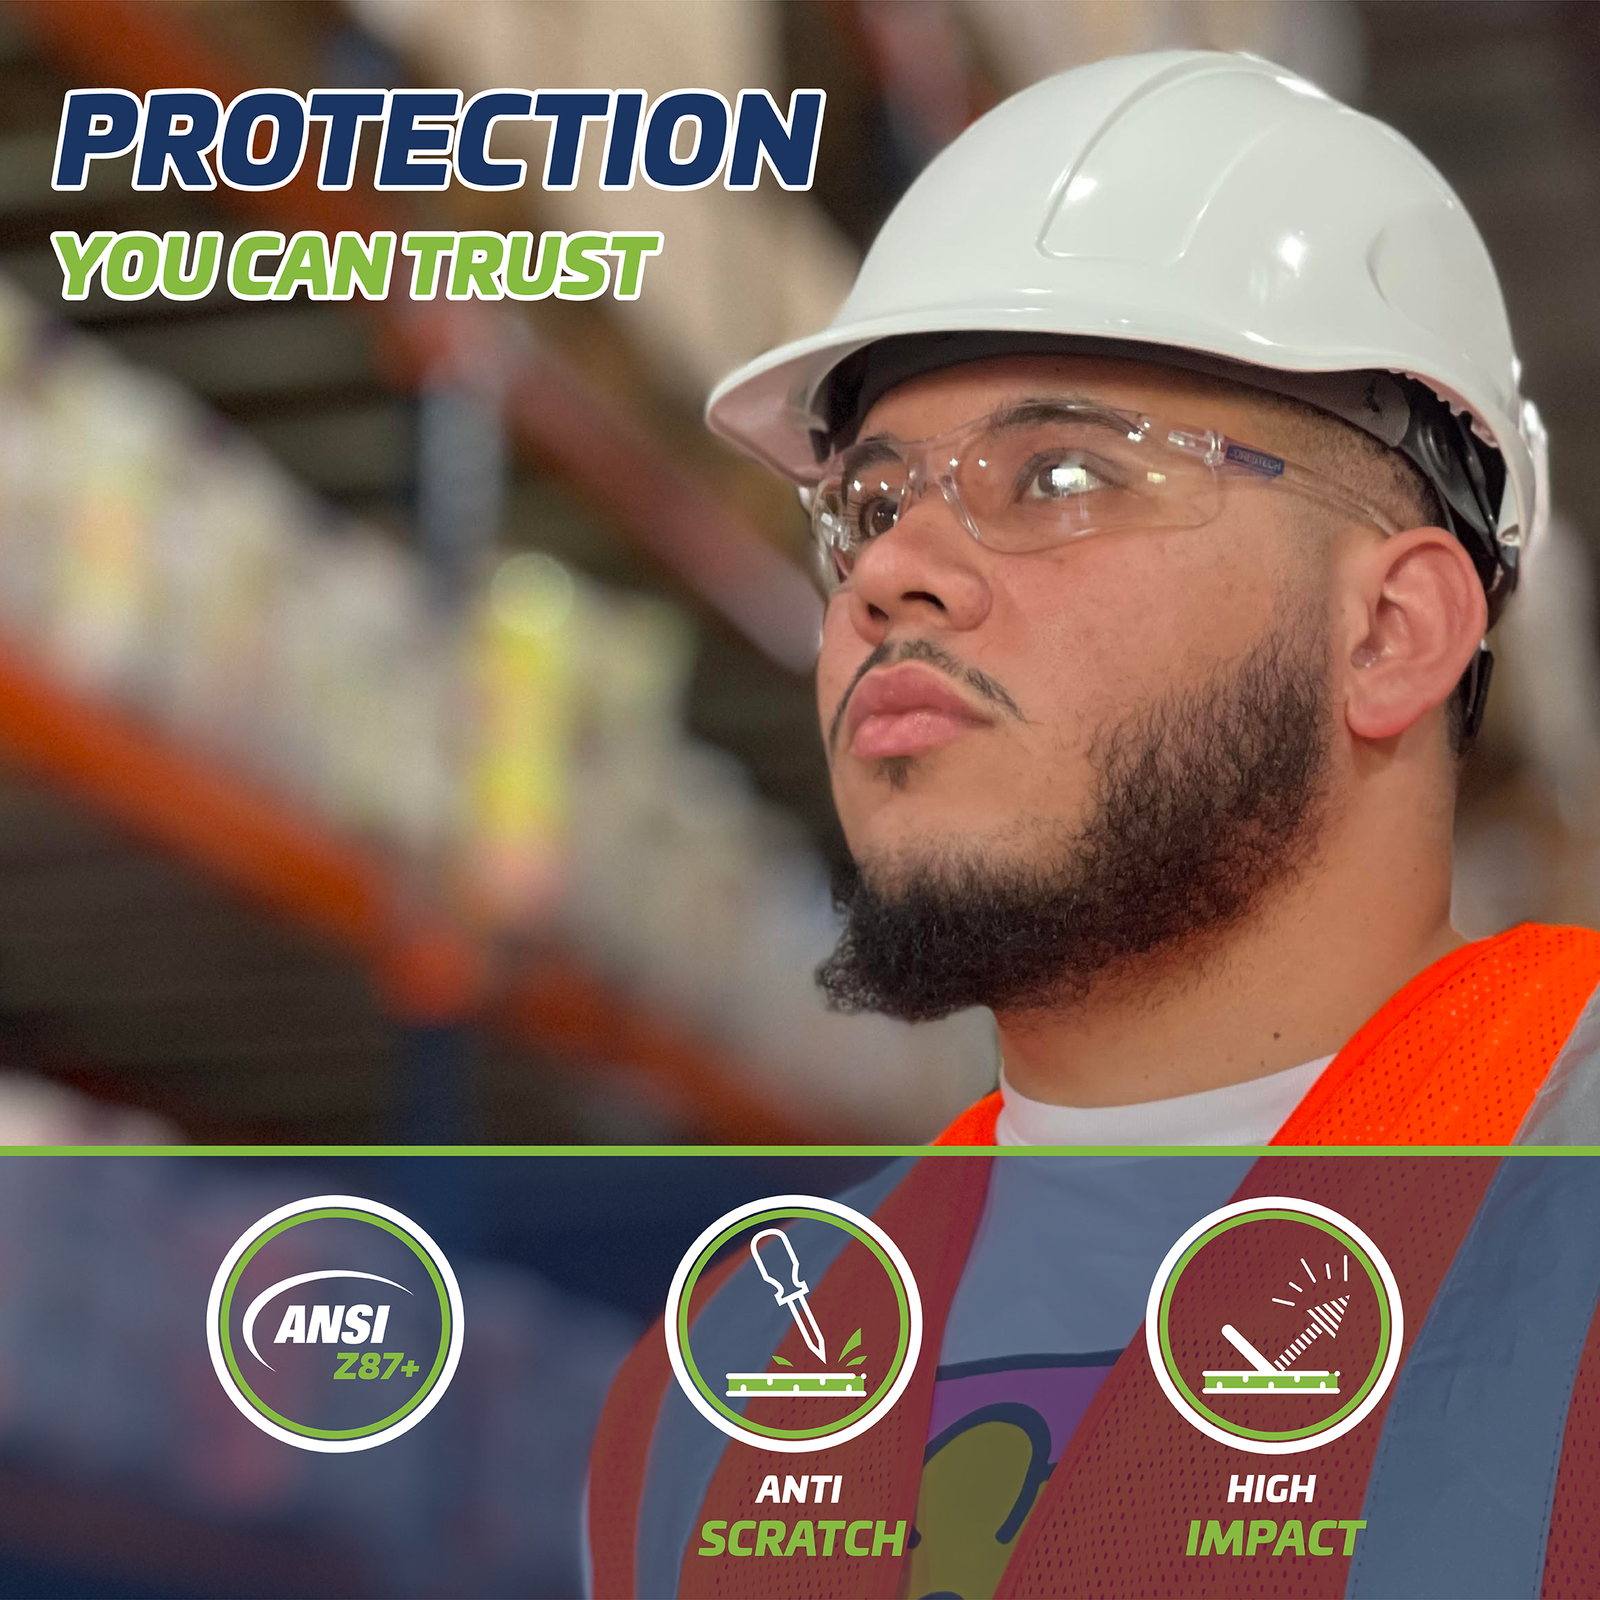 Man wearing a white hard hat, an orange reflective vest and the JORESTECH Clear wraparound safety glasses for high impact eye protection. The man is in a setting of a warehouse. Text and Icons read protection you can trust, ANSI Z87+, anti scratch and high impact.